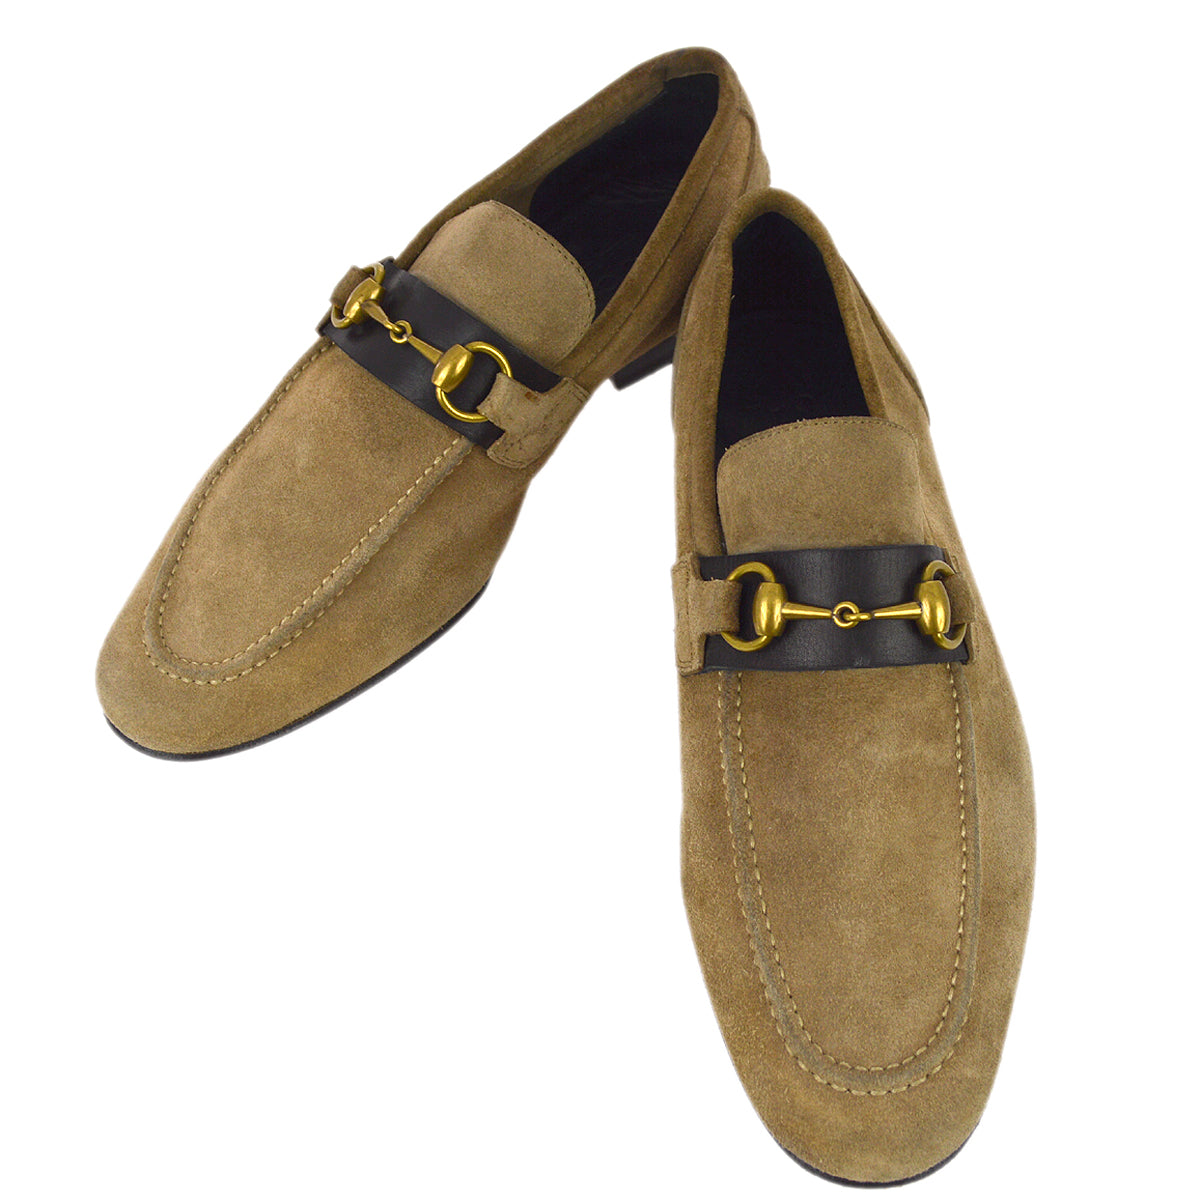 Gucci Suede Horsebit Loafers Shoes 